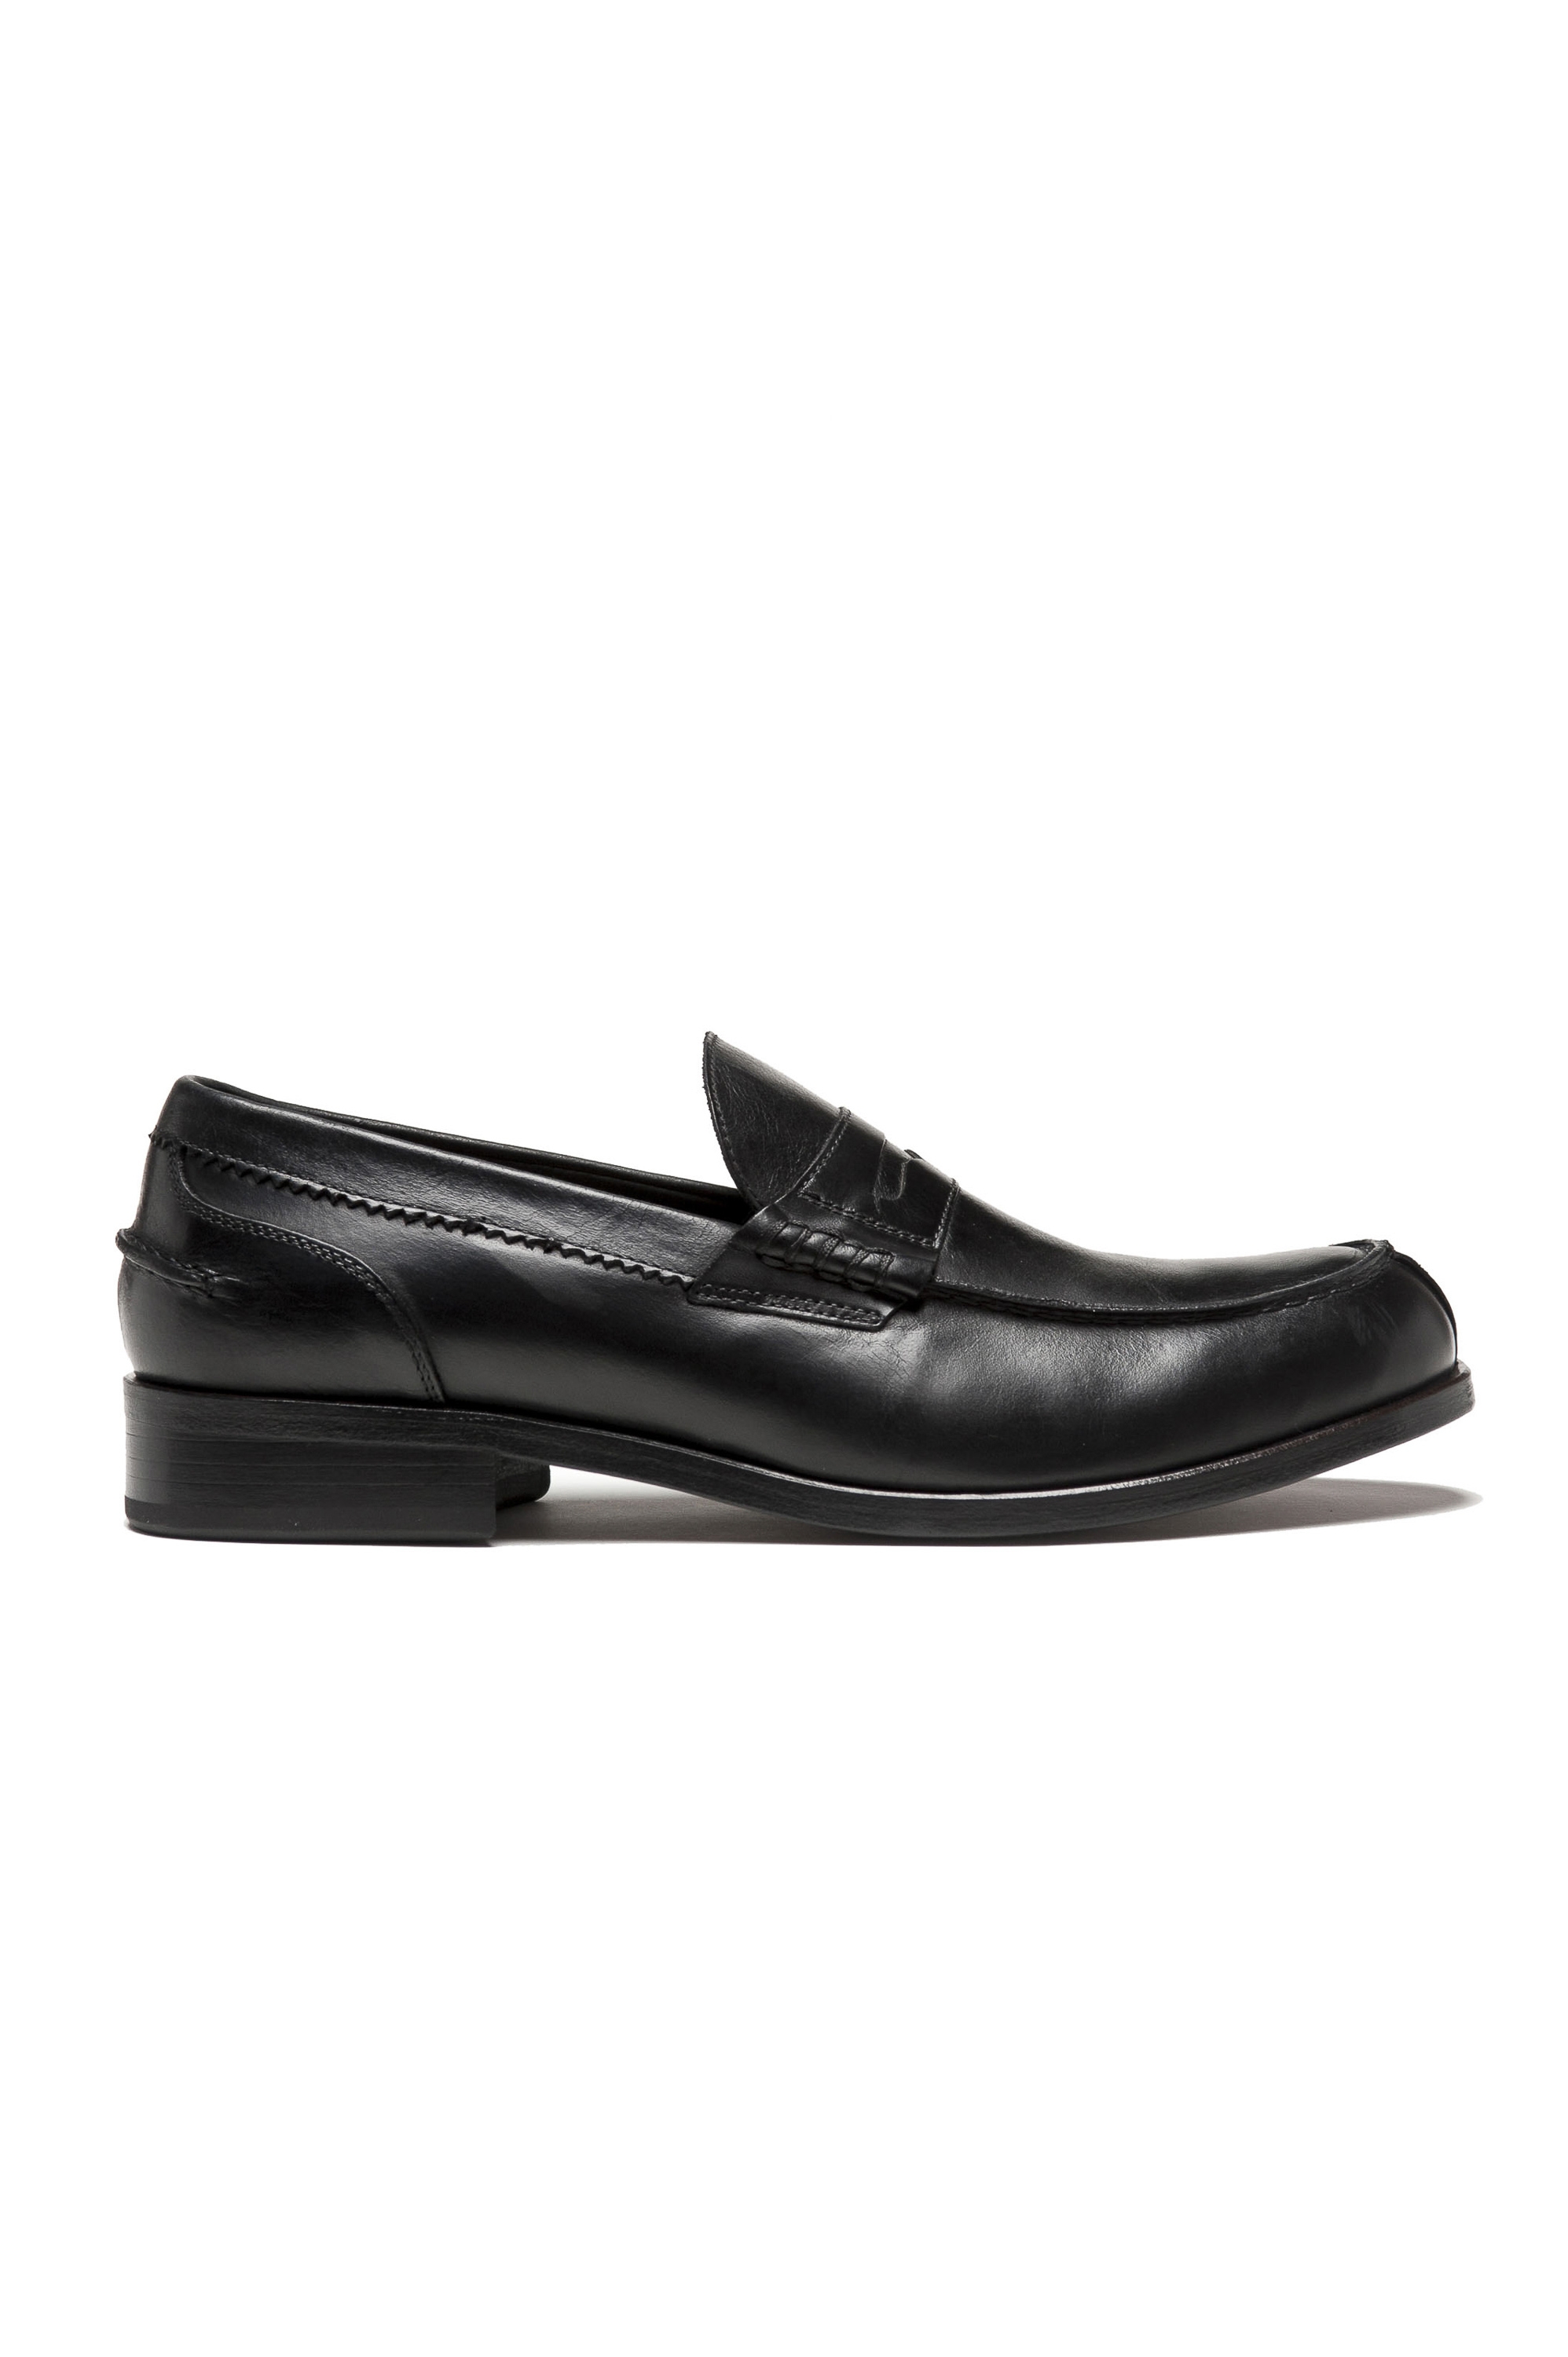 SBU 01504 Black plain calfskin penny loafers with leather sole 01